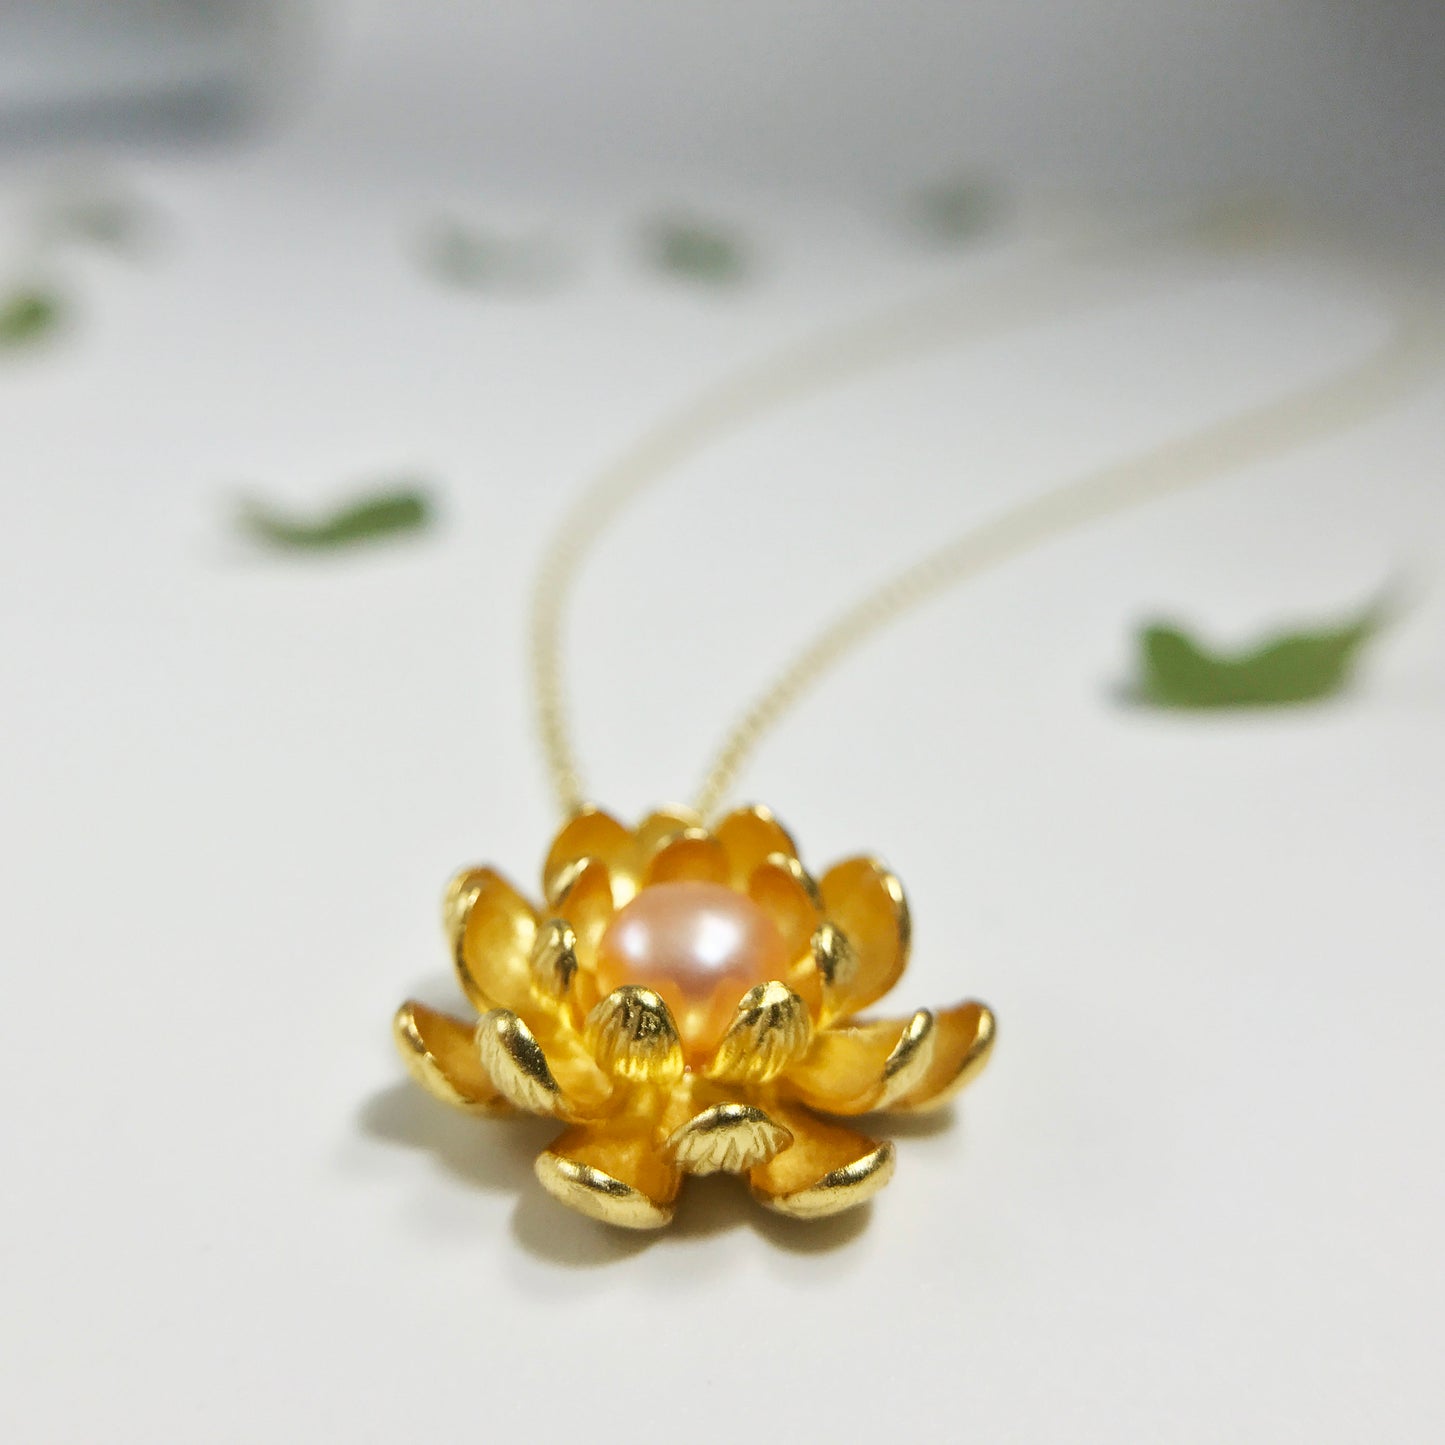 Lotus Pendant with Sterling Silver Pearl Necklace